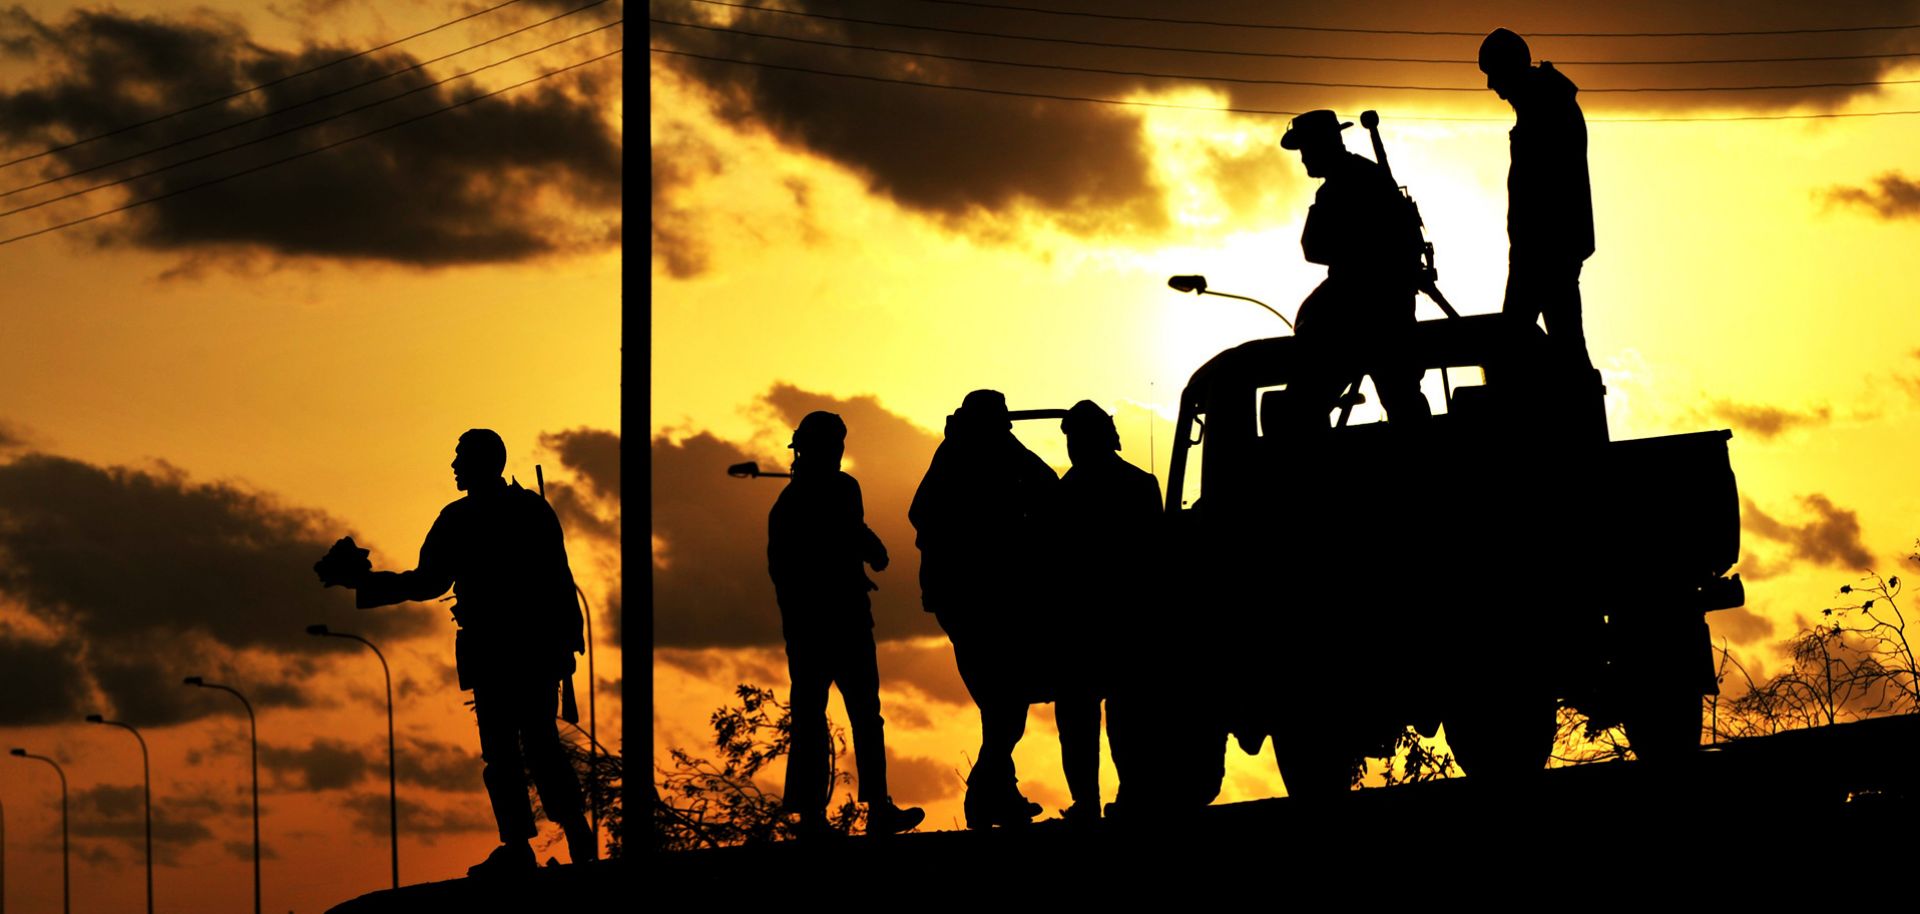 Libyan rebels are silhouetted at sunset on March 7, 2011. Three years later, an Islamist coalition would mount another revolt meant to topple the country's newly elected government.